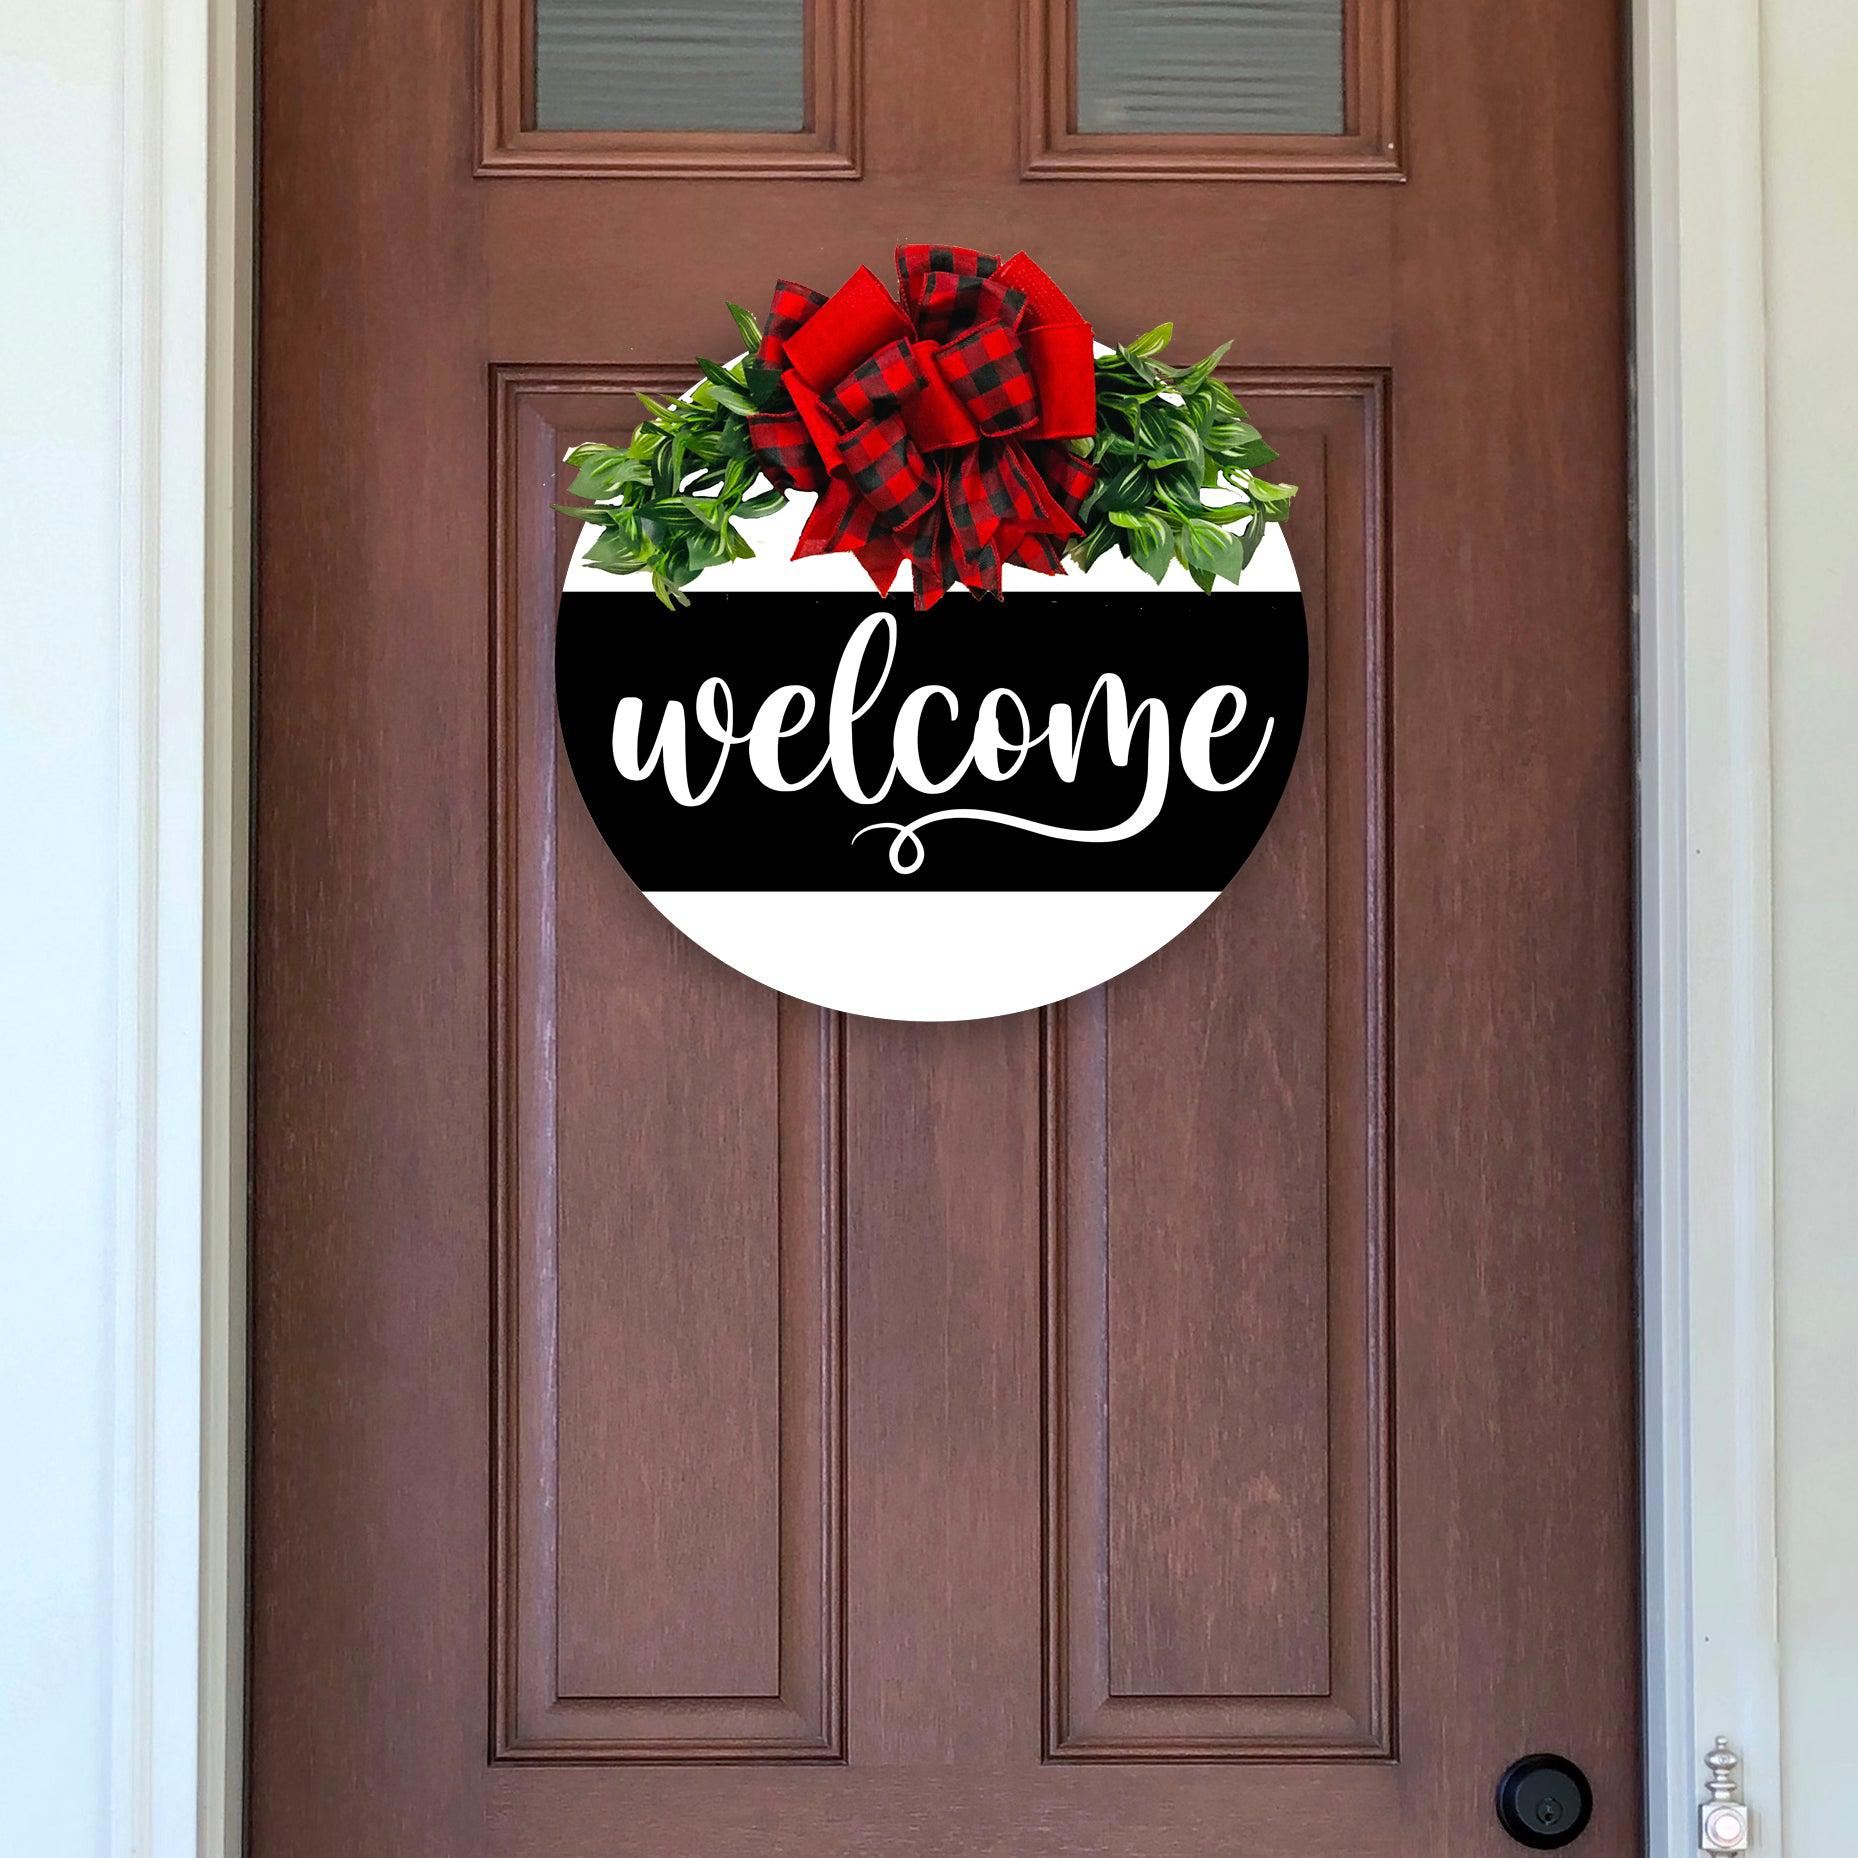 Painted 18 inch wood round door hanger. white background with welcome text on a large black stripe. black and white plaid bow with greenery.